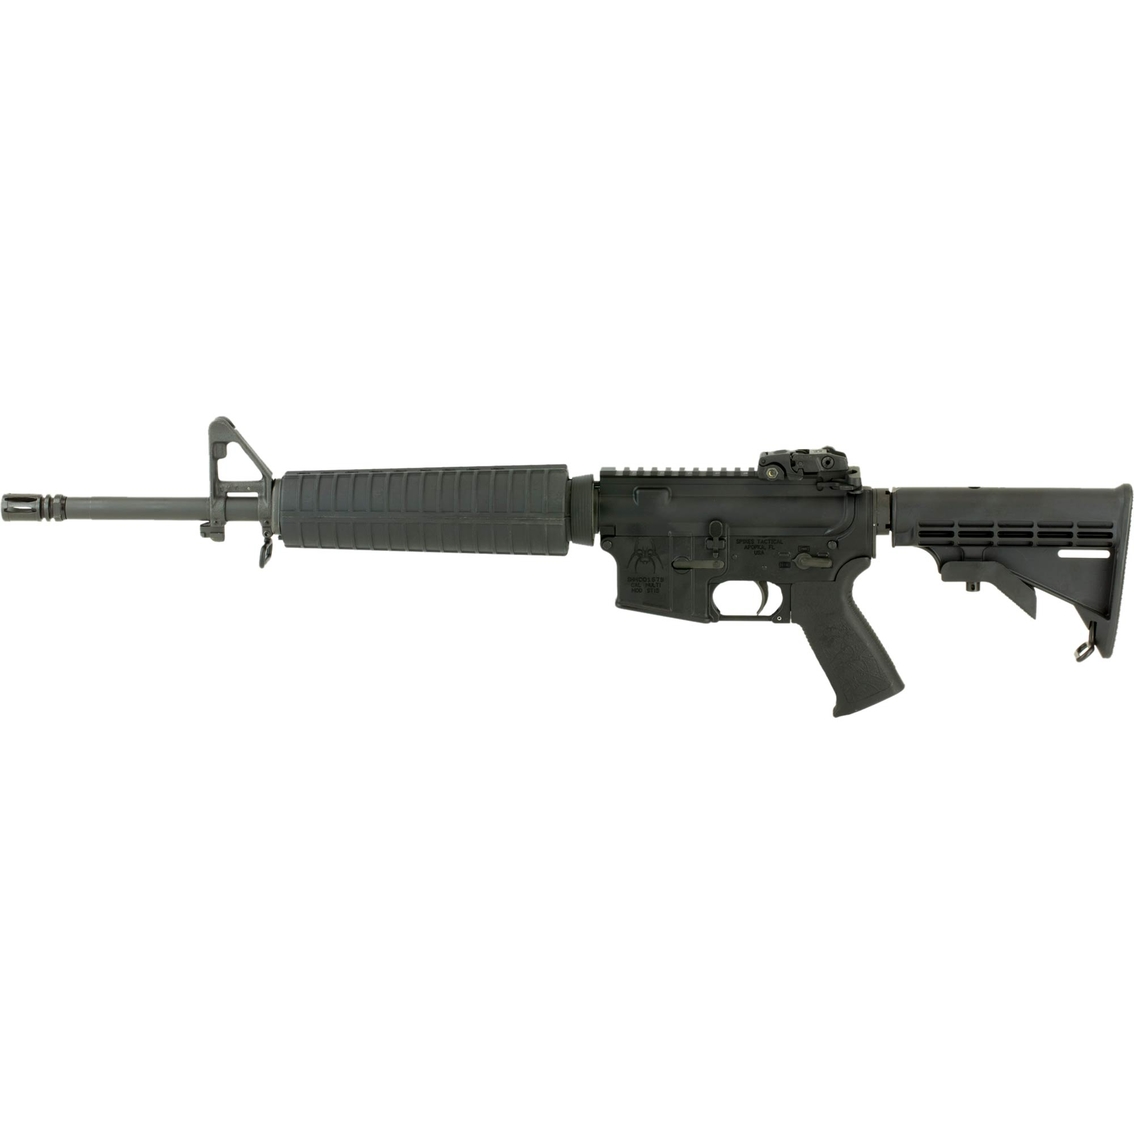 Spike's Tactical ST-15 556NATO 16 in. Barrel No Mag Rifle Black - Image 2 of 3